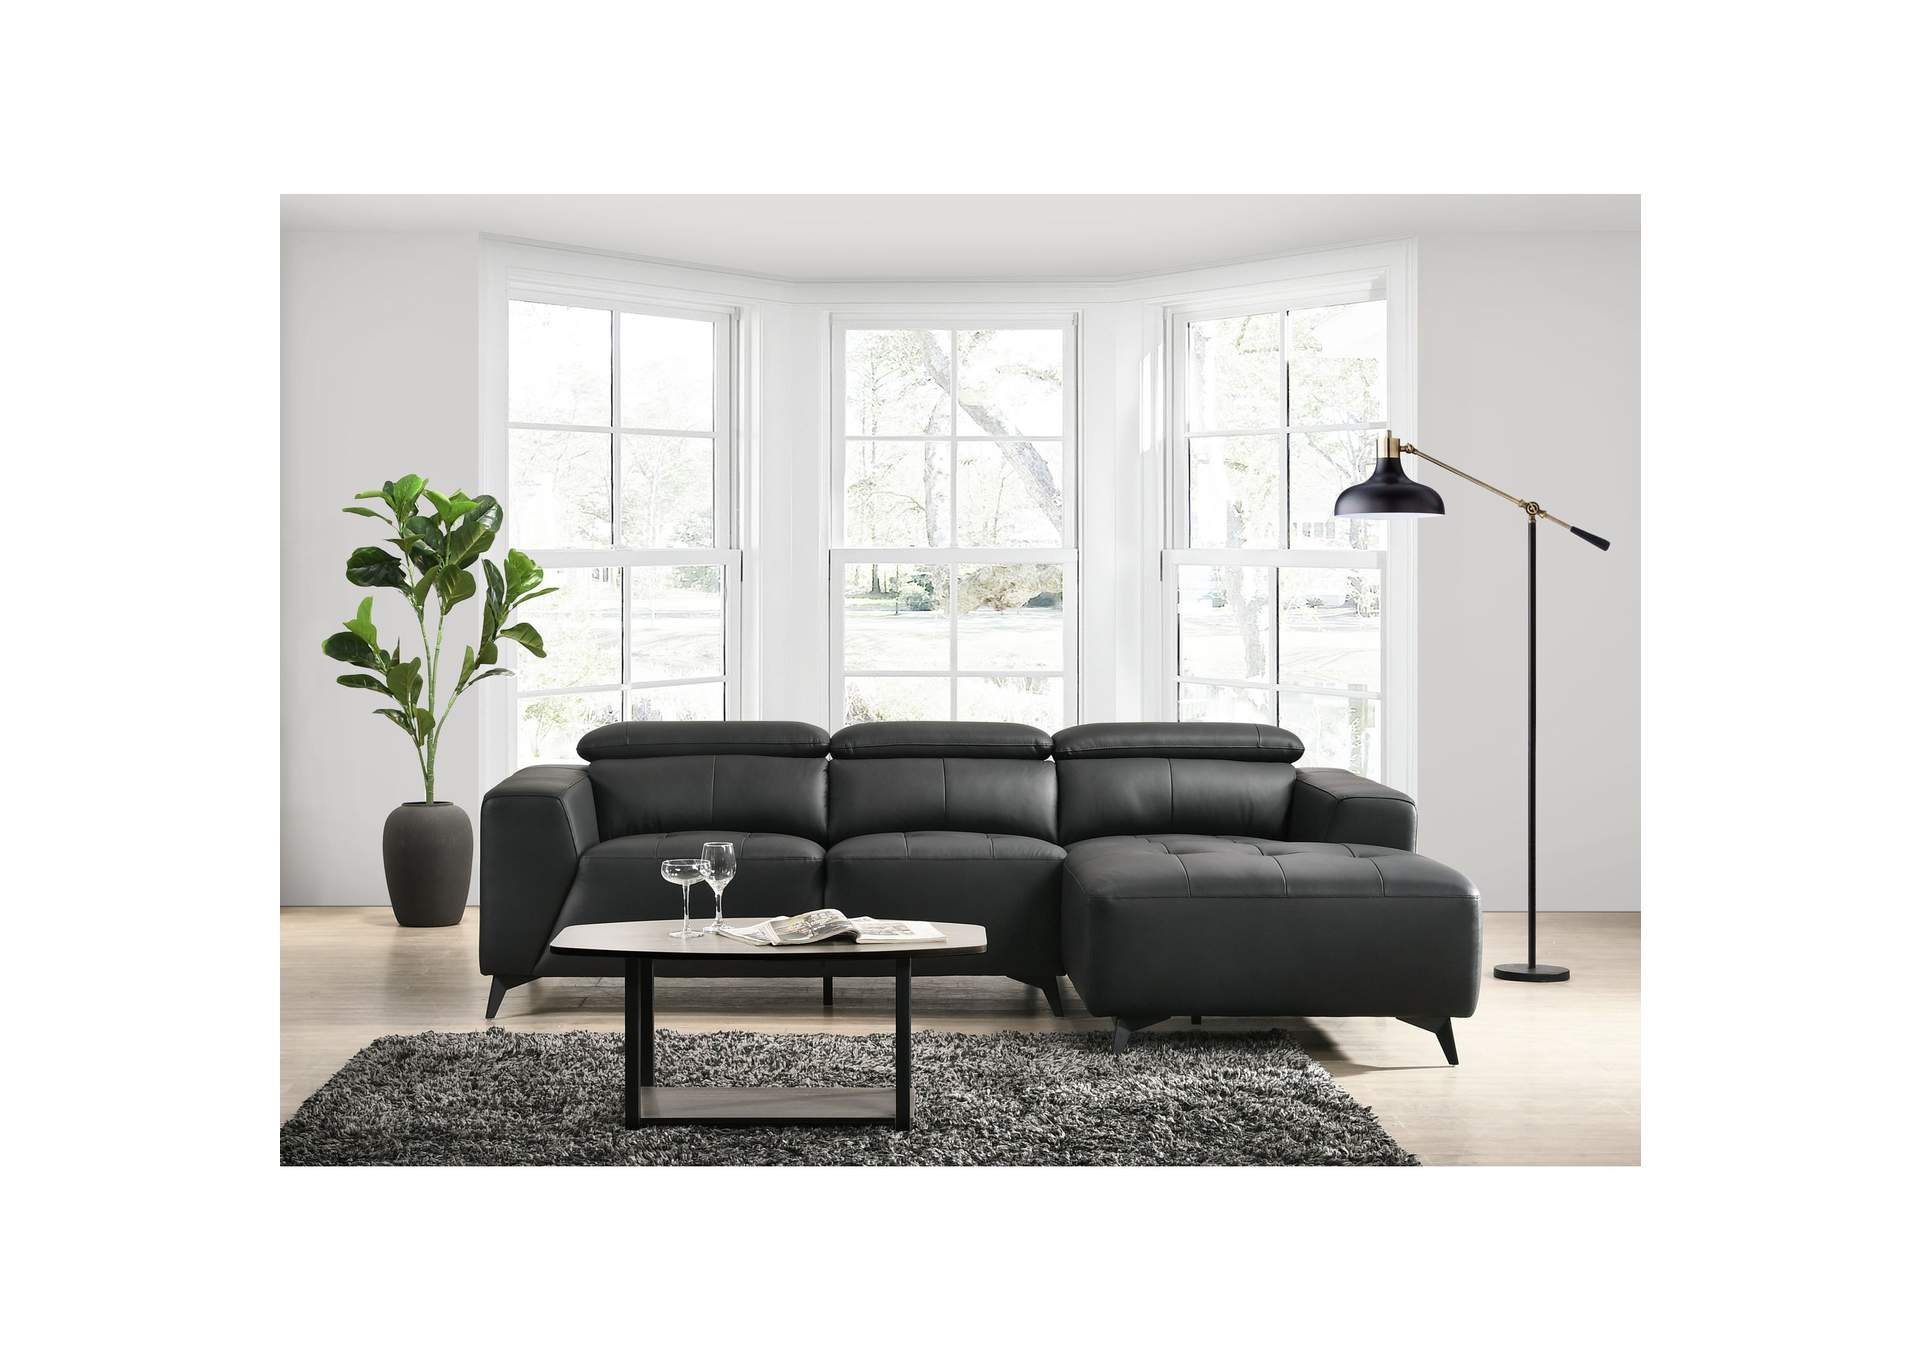 Salvador Right Hand Facing Chaise In Aviarah Black,Elements